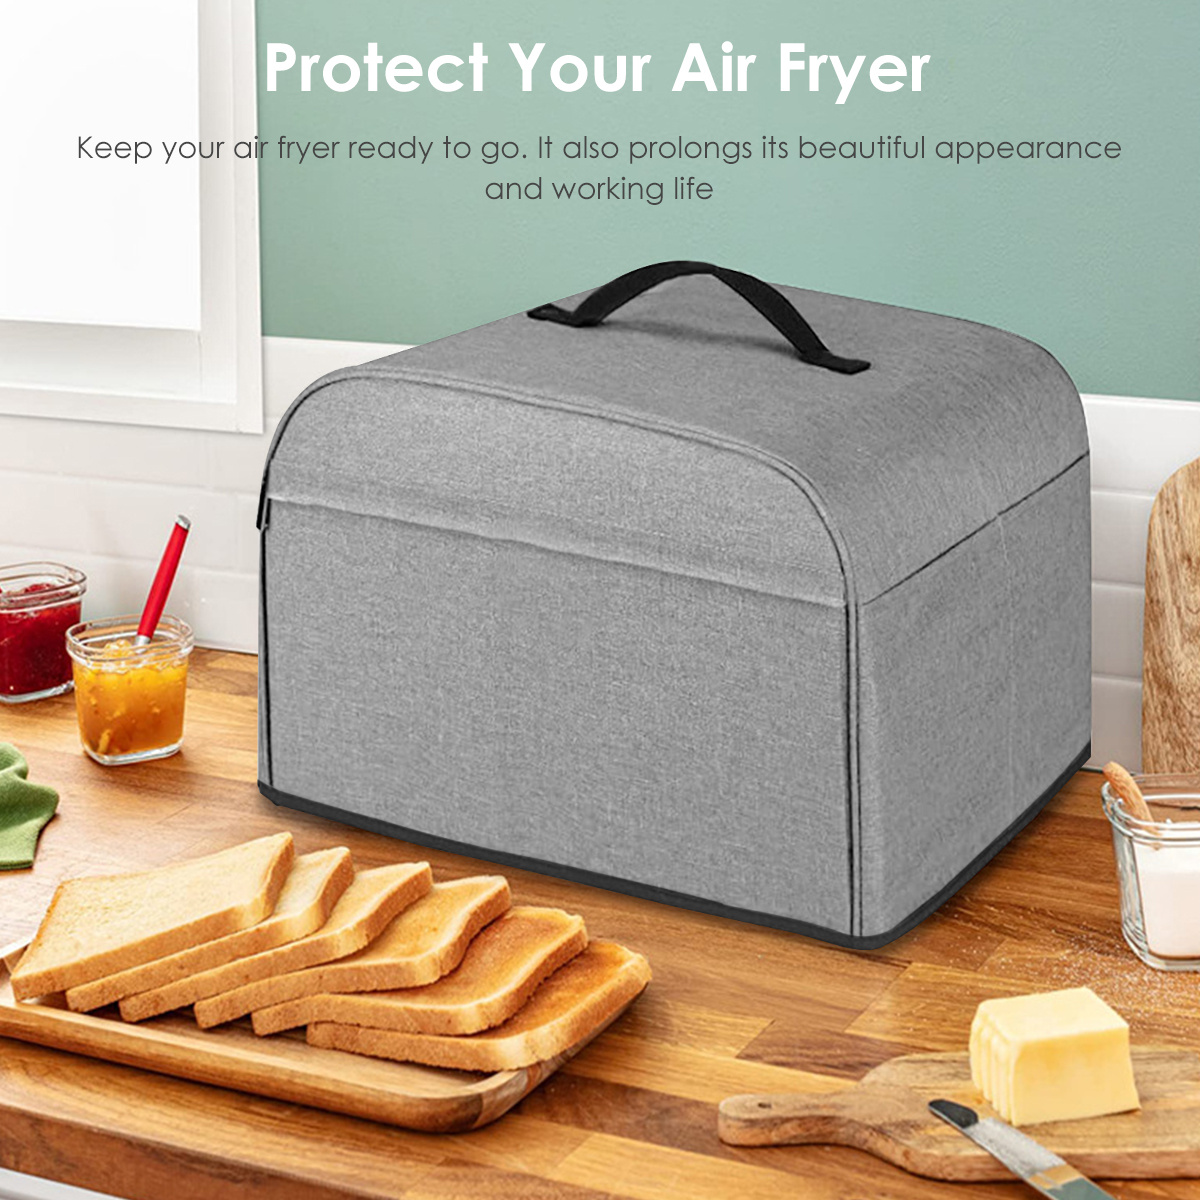 Dust Cover Compatible with Ninja Foodi Grill (AG301, AG302, AG400) and  Accessories,Water Resistant Air Fryer Cover with 6 Storage Pockets,Black